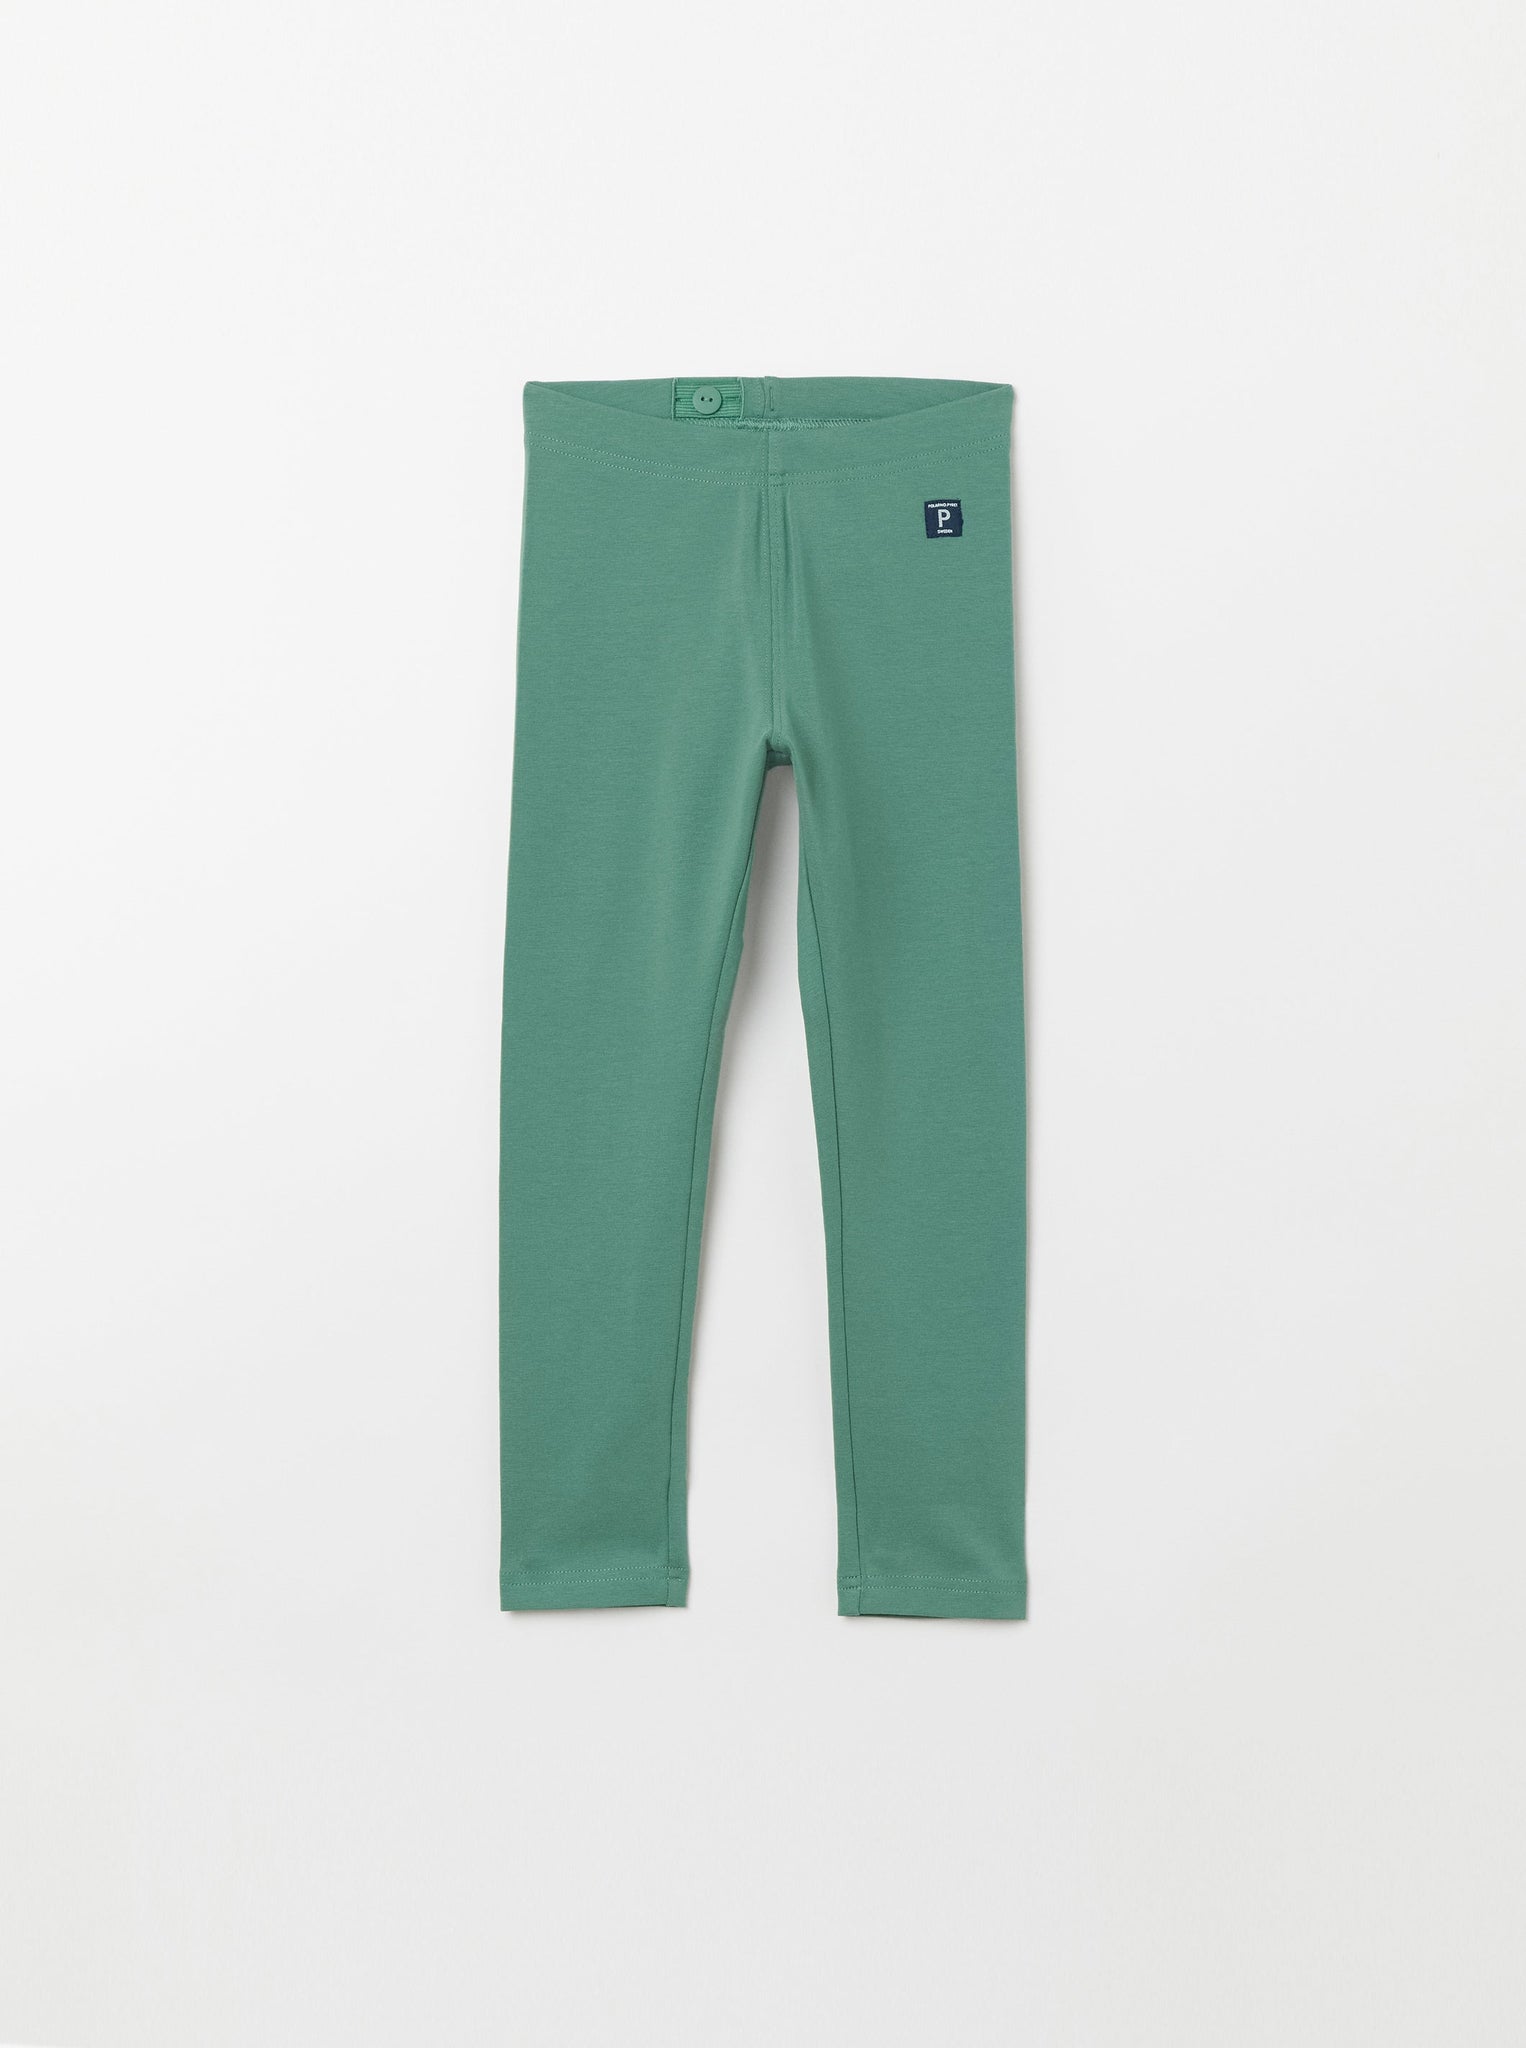 Organic Cotton Green Kids Leggings from the Polarn O. Pyret Kidswear collection. Ethically produced kids clothing.